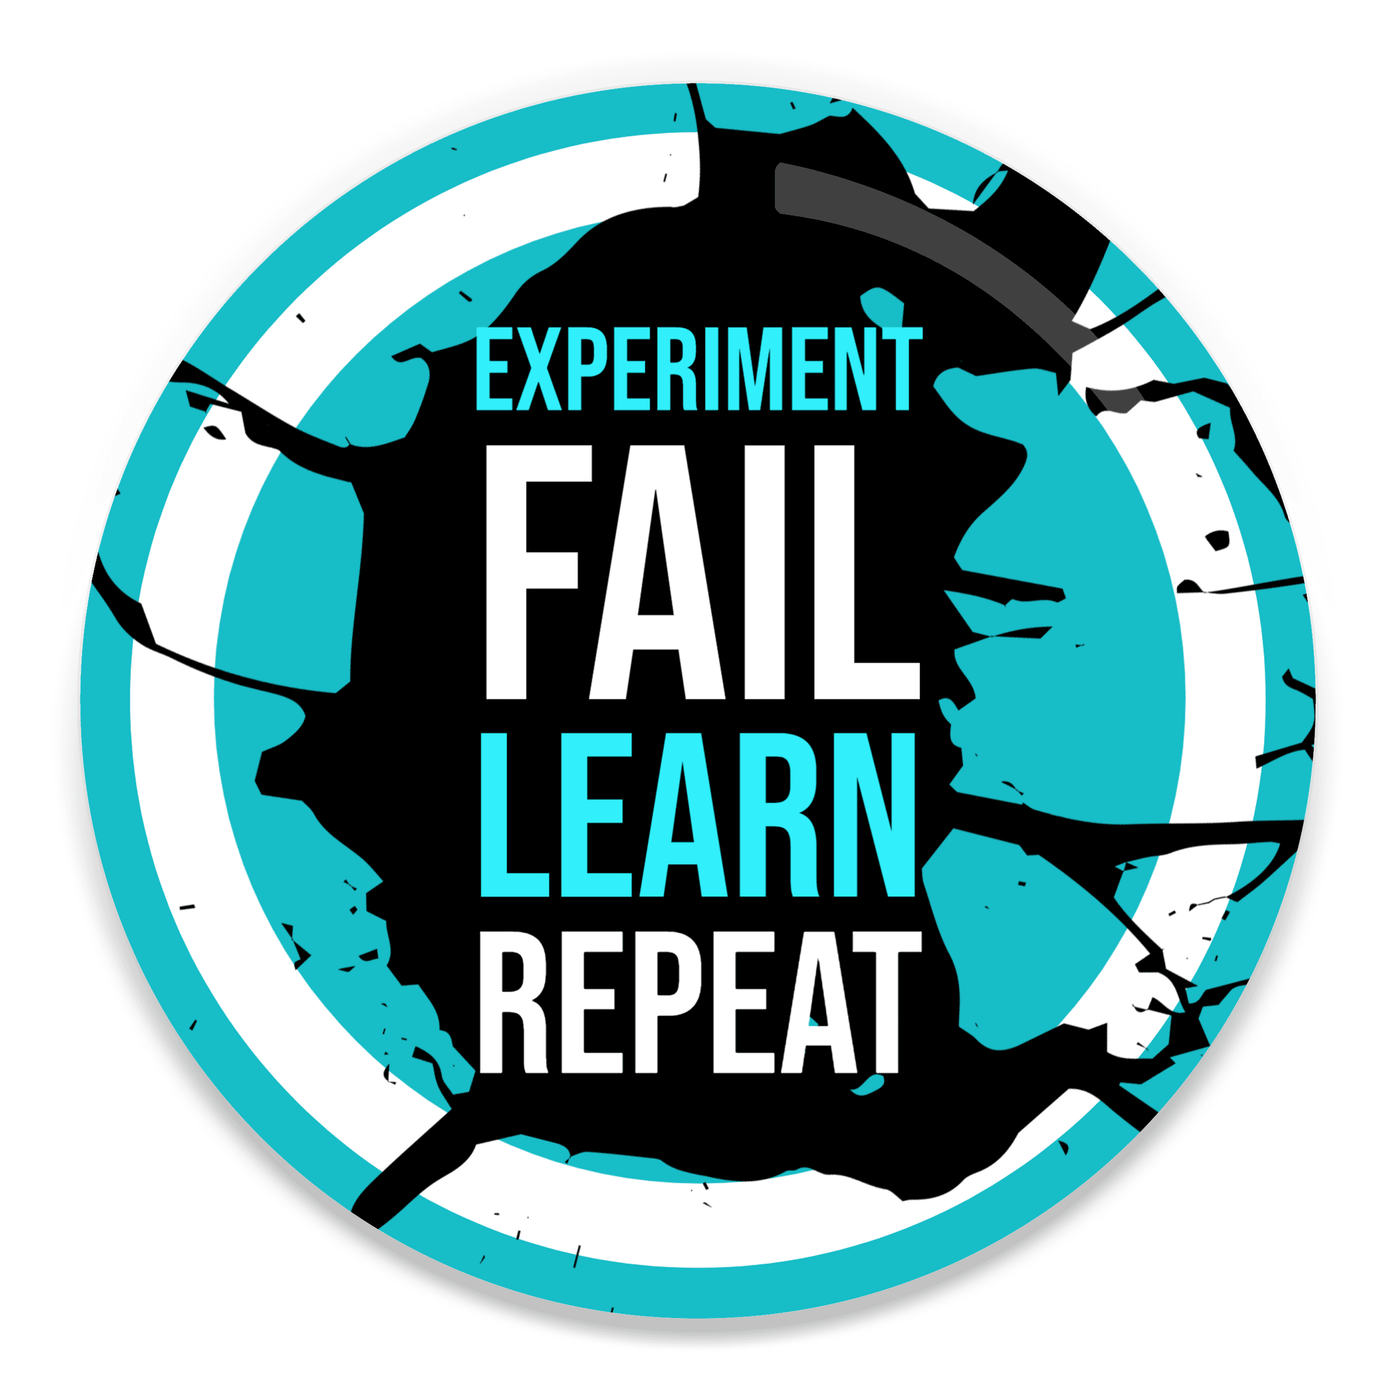 2.25 inch round colorful magnet with image of text saying experiment fail learn repeat